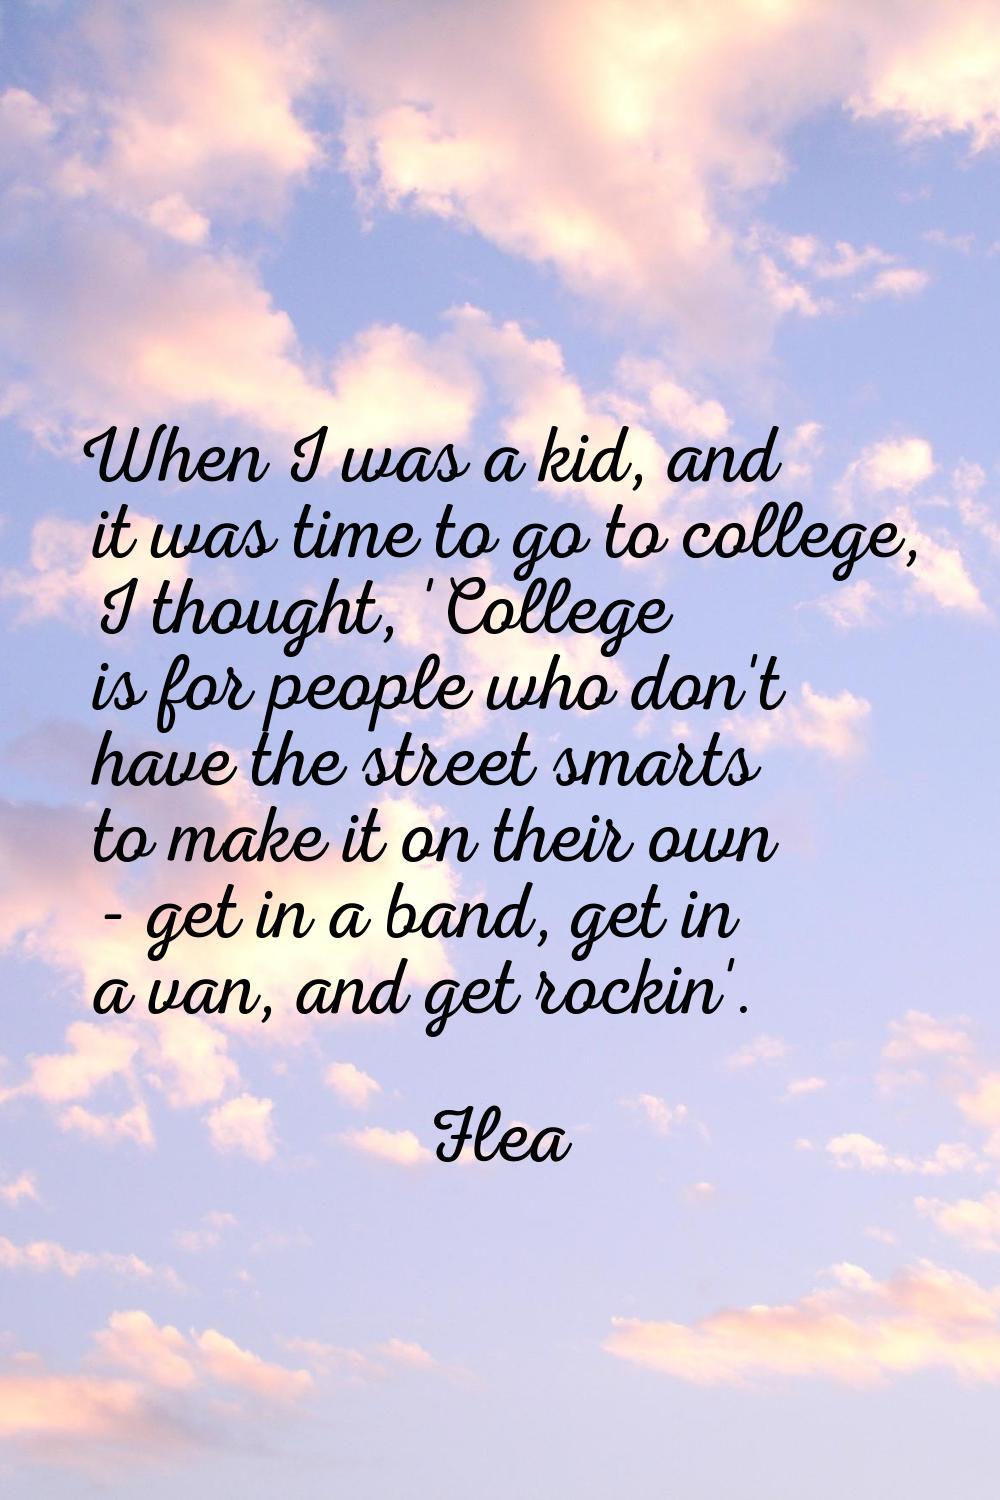 When I was a kid, and it was time to go to college, I thought, 'College is for people who don't hav